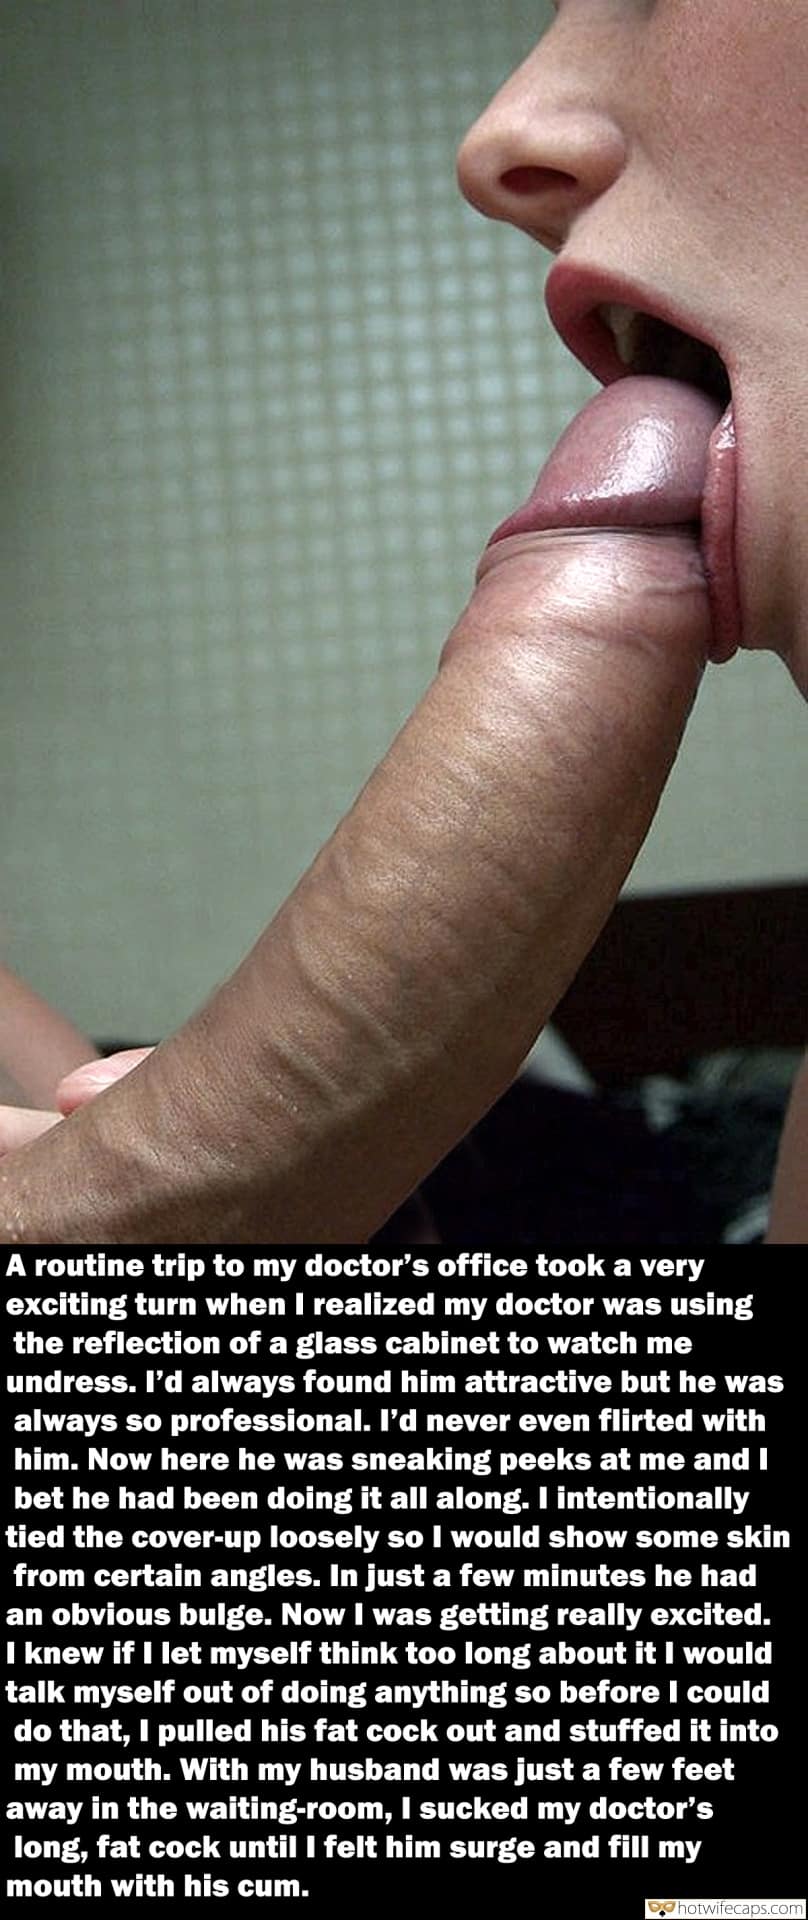 Dirty Talk Blowjob hotwife caption: A routine trip to my doctor’s office took a very exciting turn when I realized my doctor was using the reflection of a glass cabinet to watch me undress. l’d always found him attractive but he was always so professional....